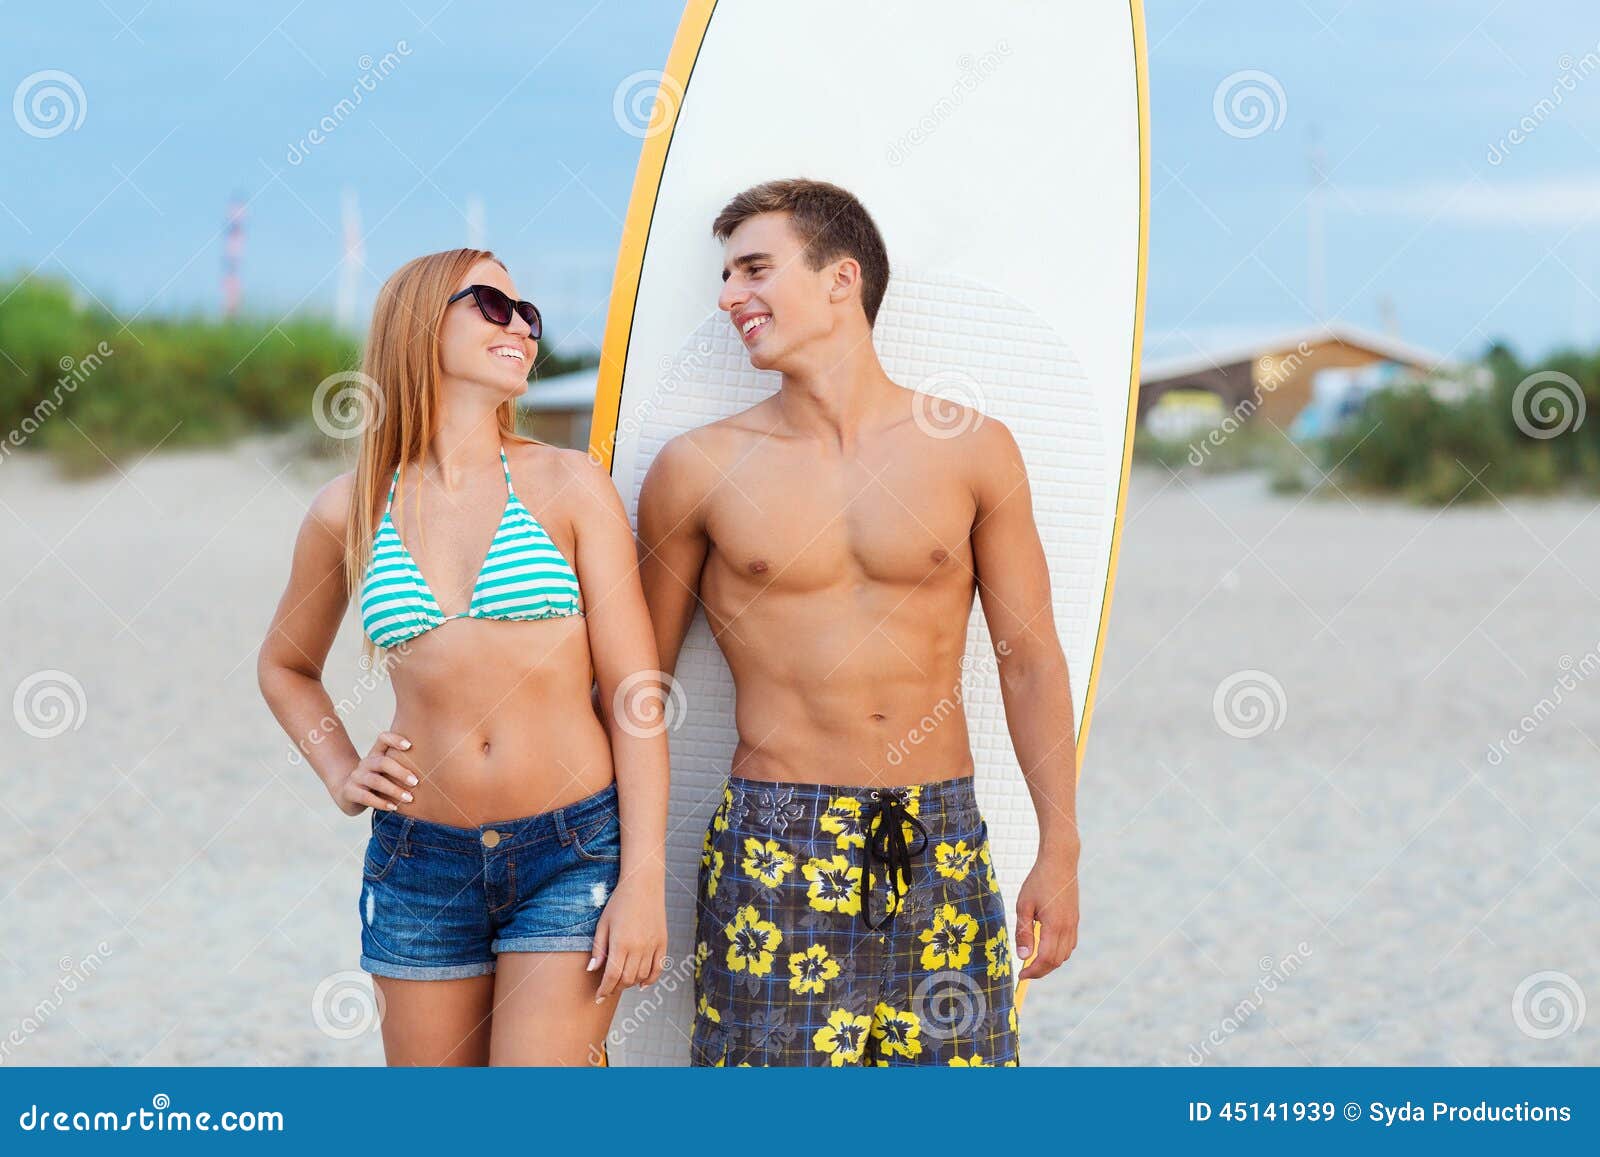 smiling couple in sunglasses with surfs on beach